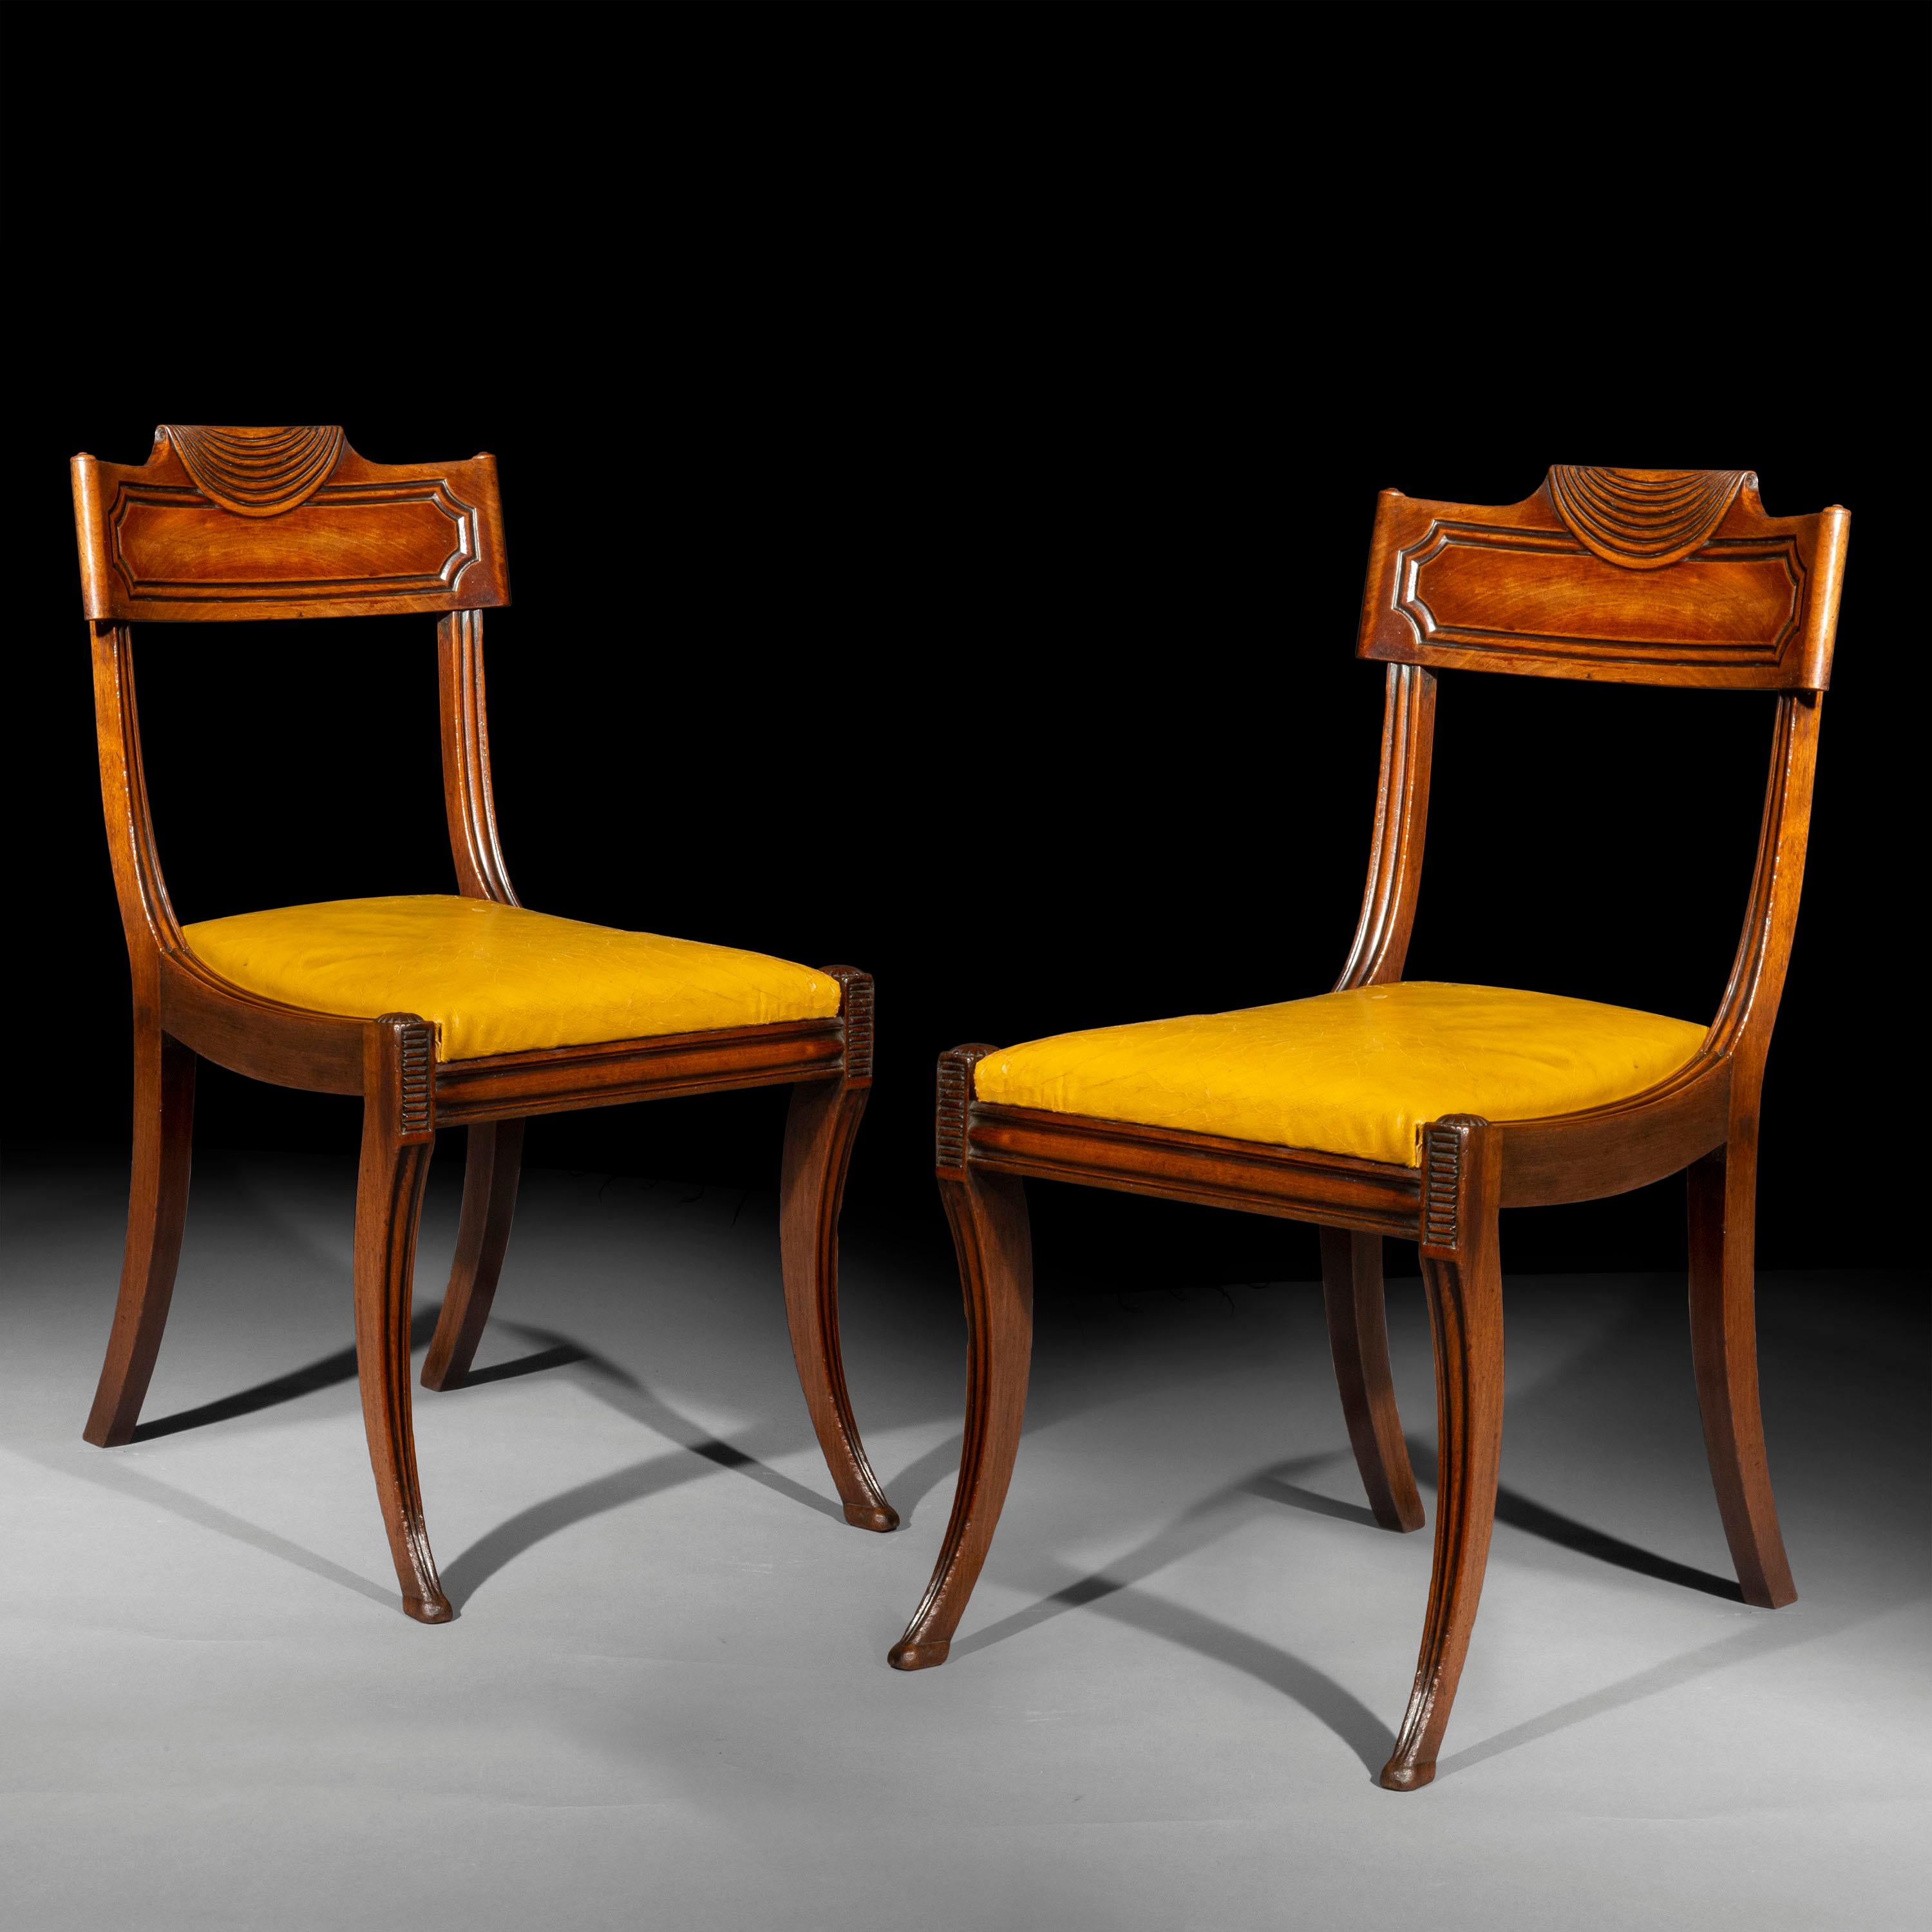 A rare and unusual Regency period pair of 'Klismos' chairs, in the manner of the London makers Marsh and Tatham.

England, circa 1810.

Why we like them
This model is one of the most elegant Regency chairs that we have handled. Their bold spread of